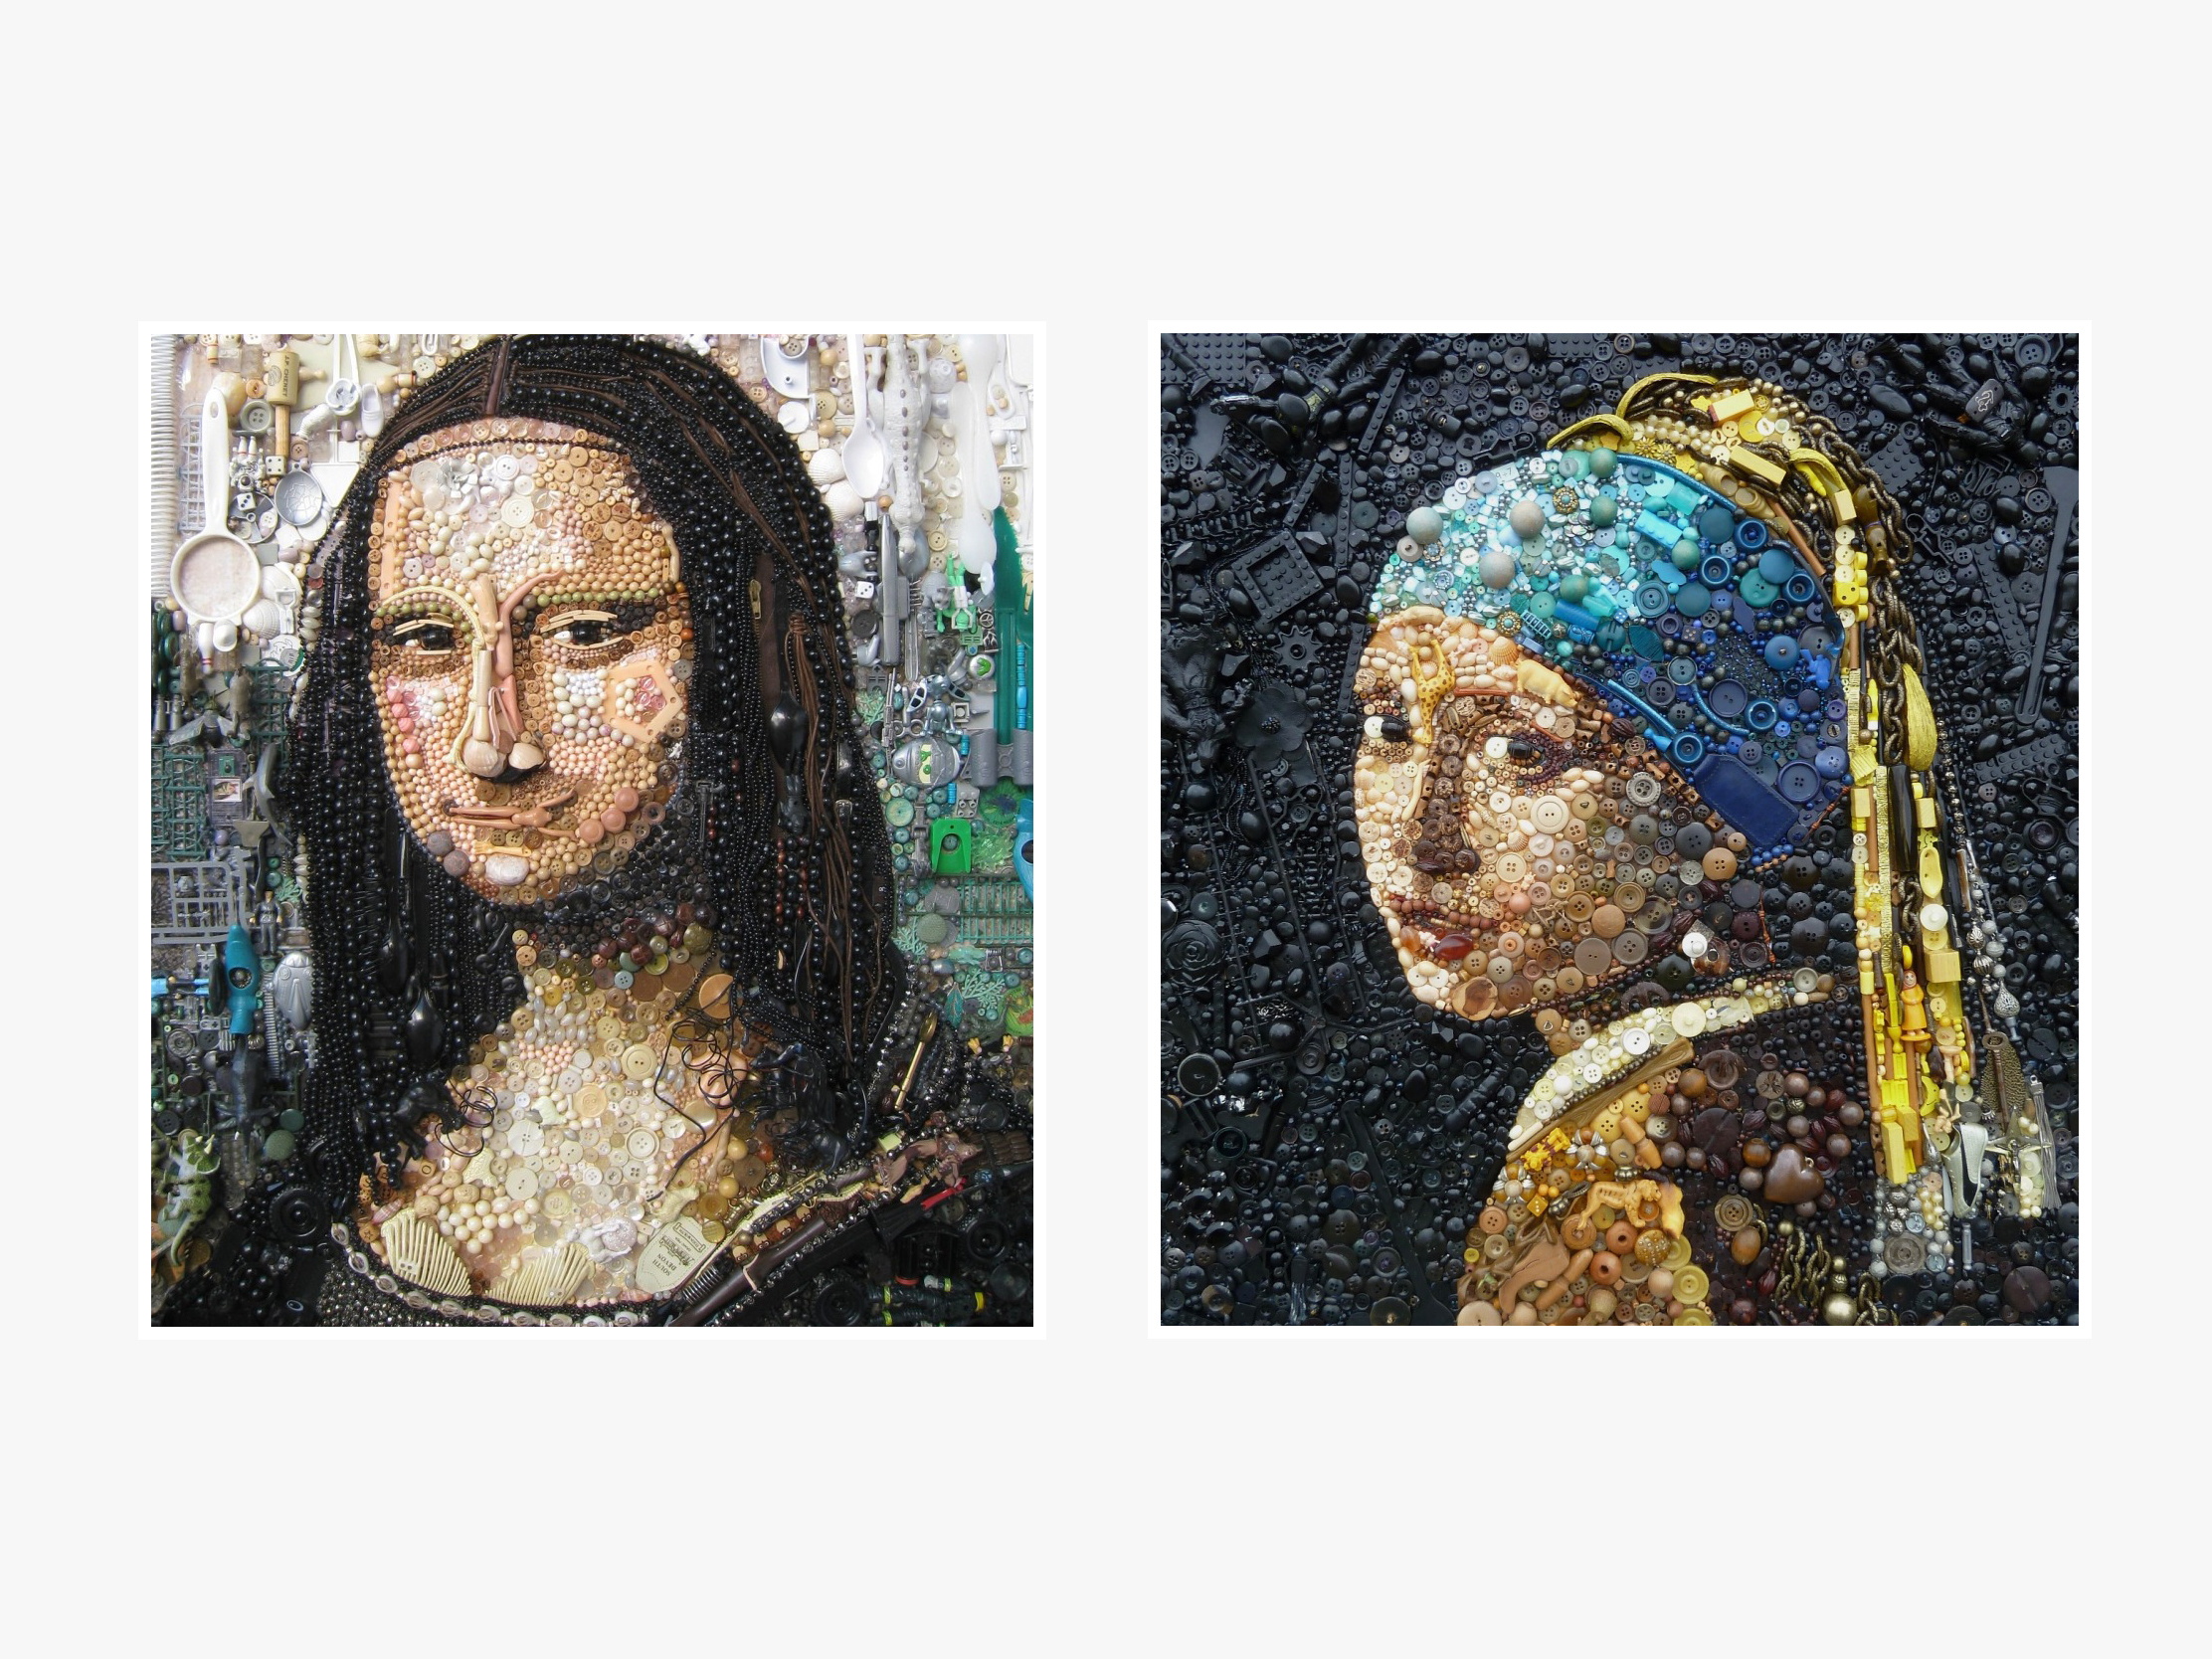 The Mona Lisa and Girl with a Pearl Earring remade in found plastic objects